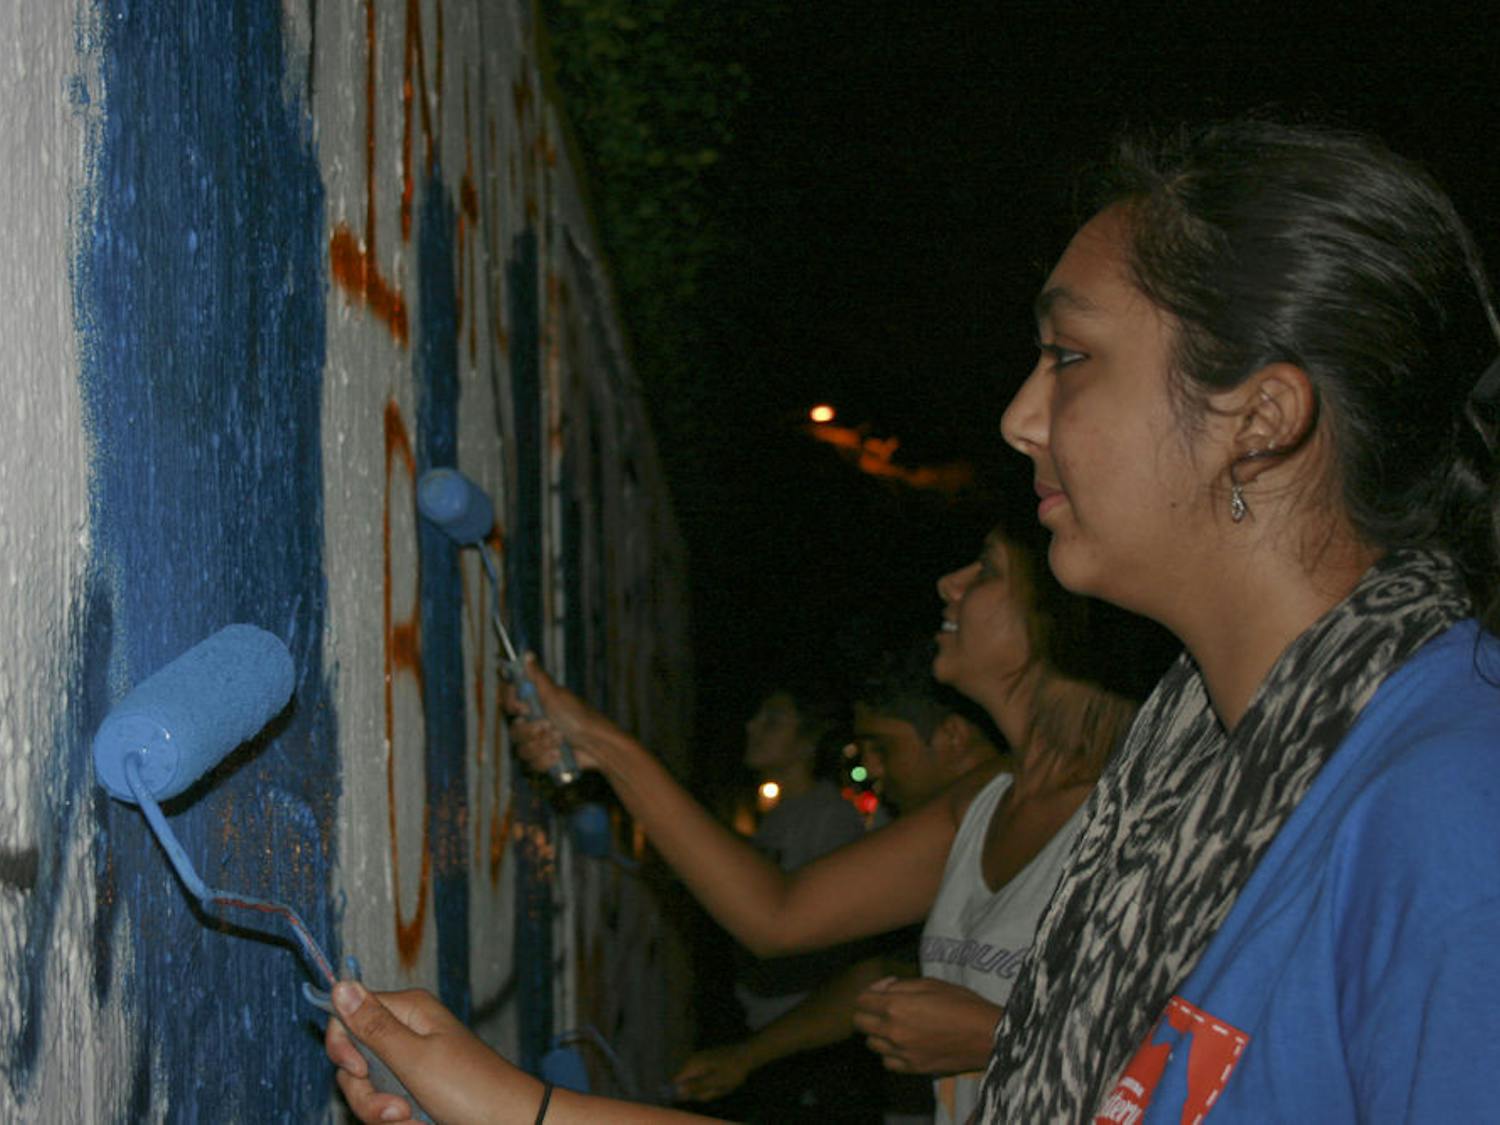 Izma Nadeem, an 18-year-old UF biology freshman, paints the 34th Street Wall on Oct. 1, 2015, to promote Fast-a-Thon. Islam on Campus will hold the event Tuesday at 6:30 p.m. in the Stephen C. O'Connell Center.